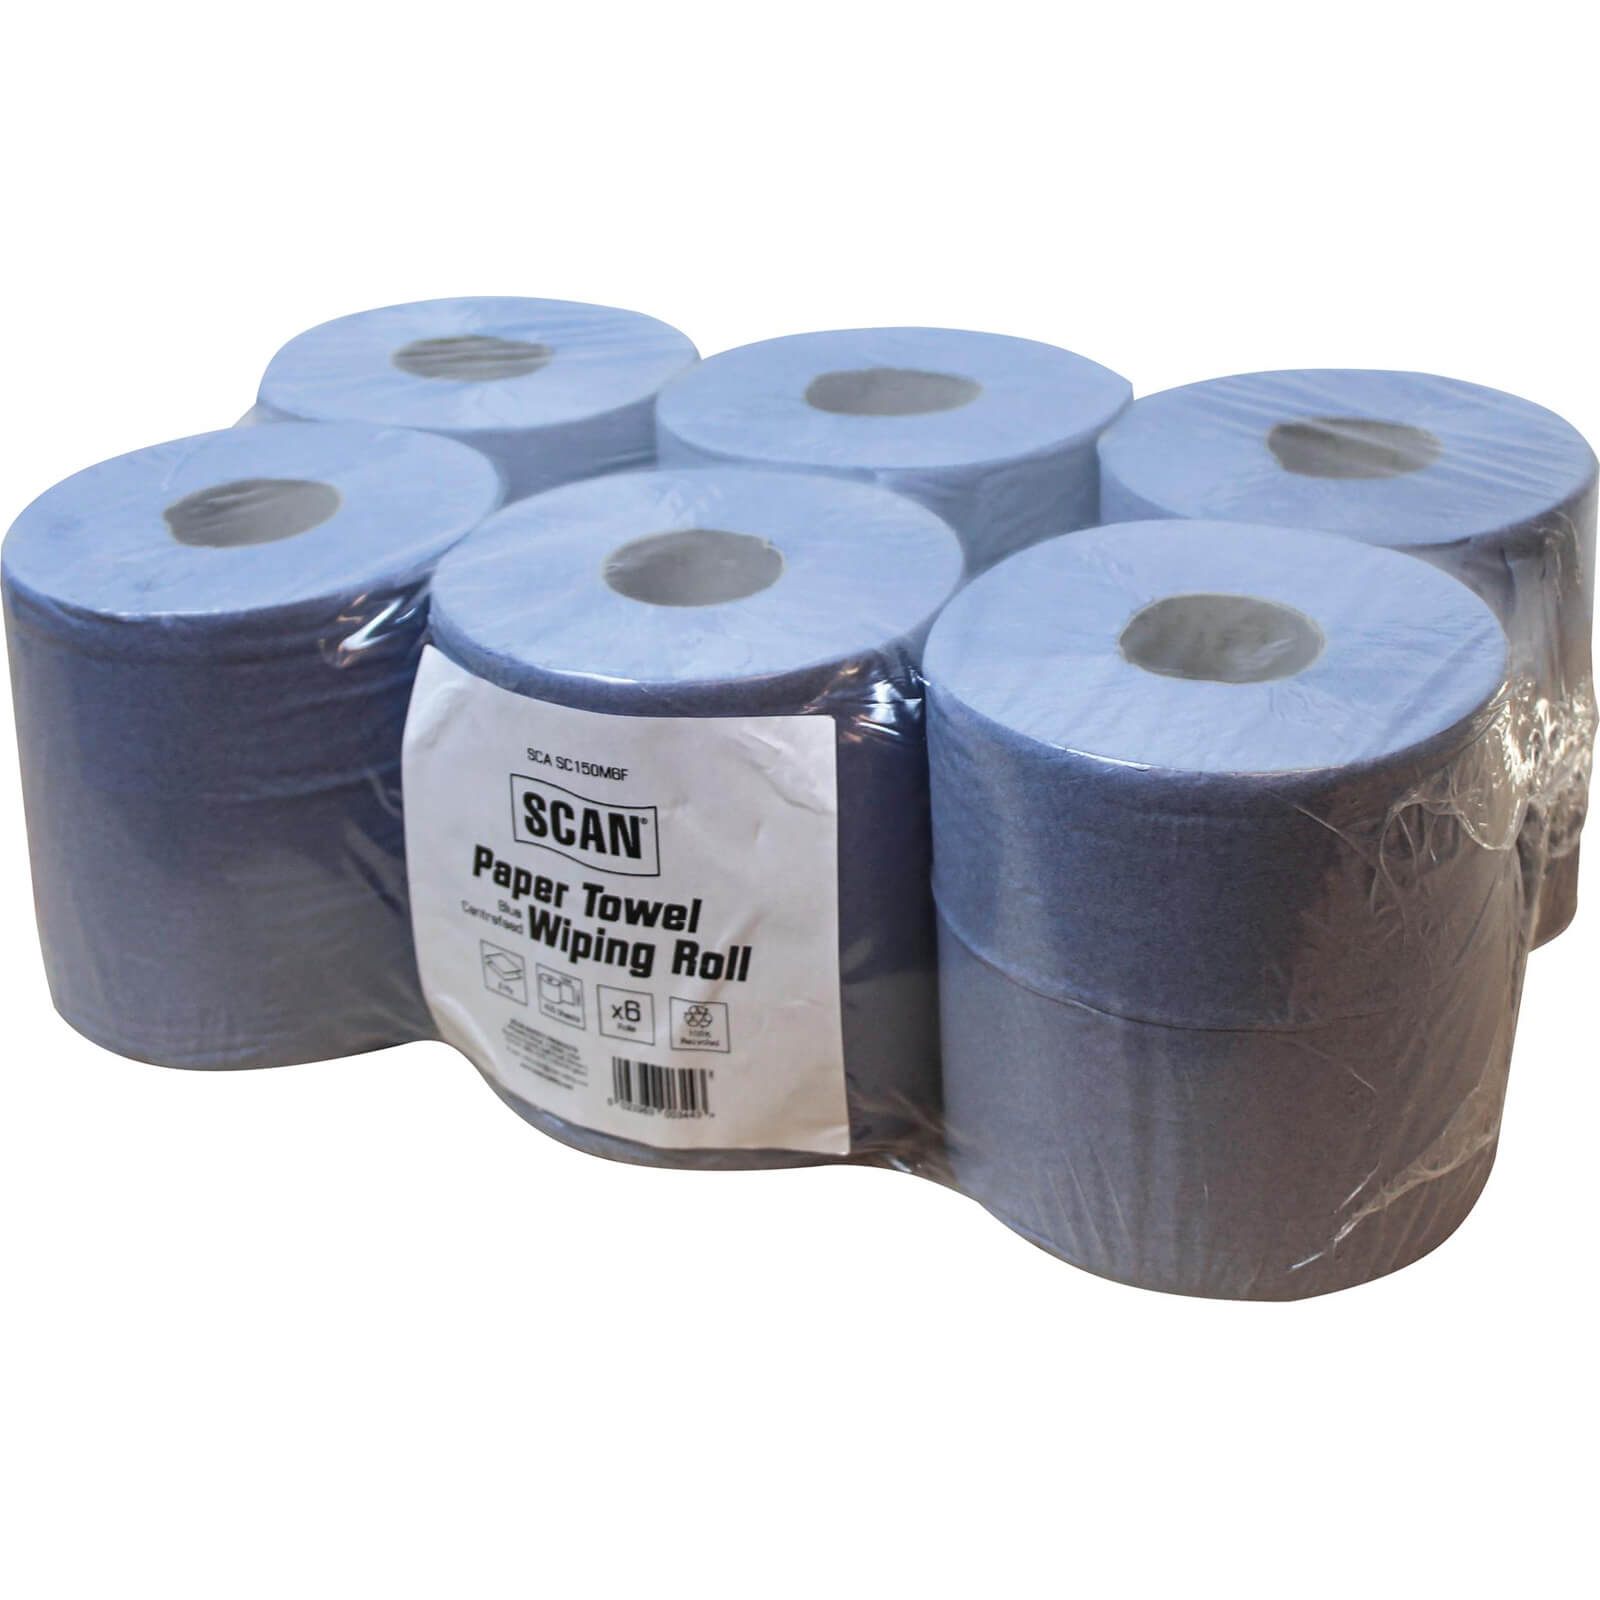 Image of Scan 2 Ply Paper Towel Wiping Rolls Pack of 6